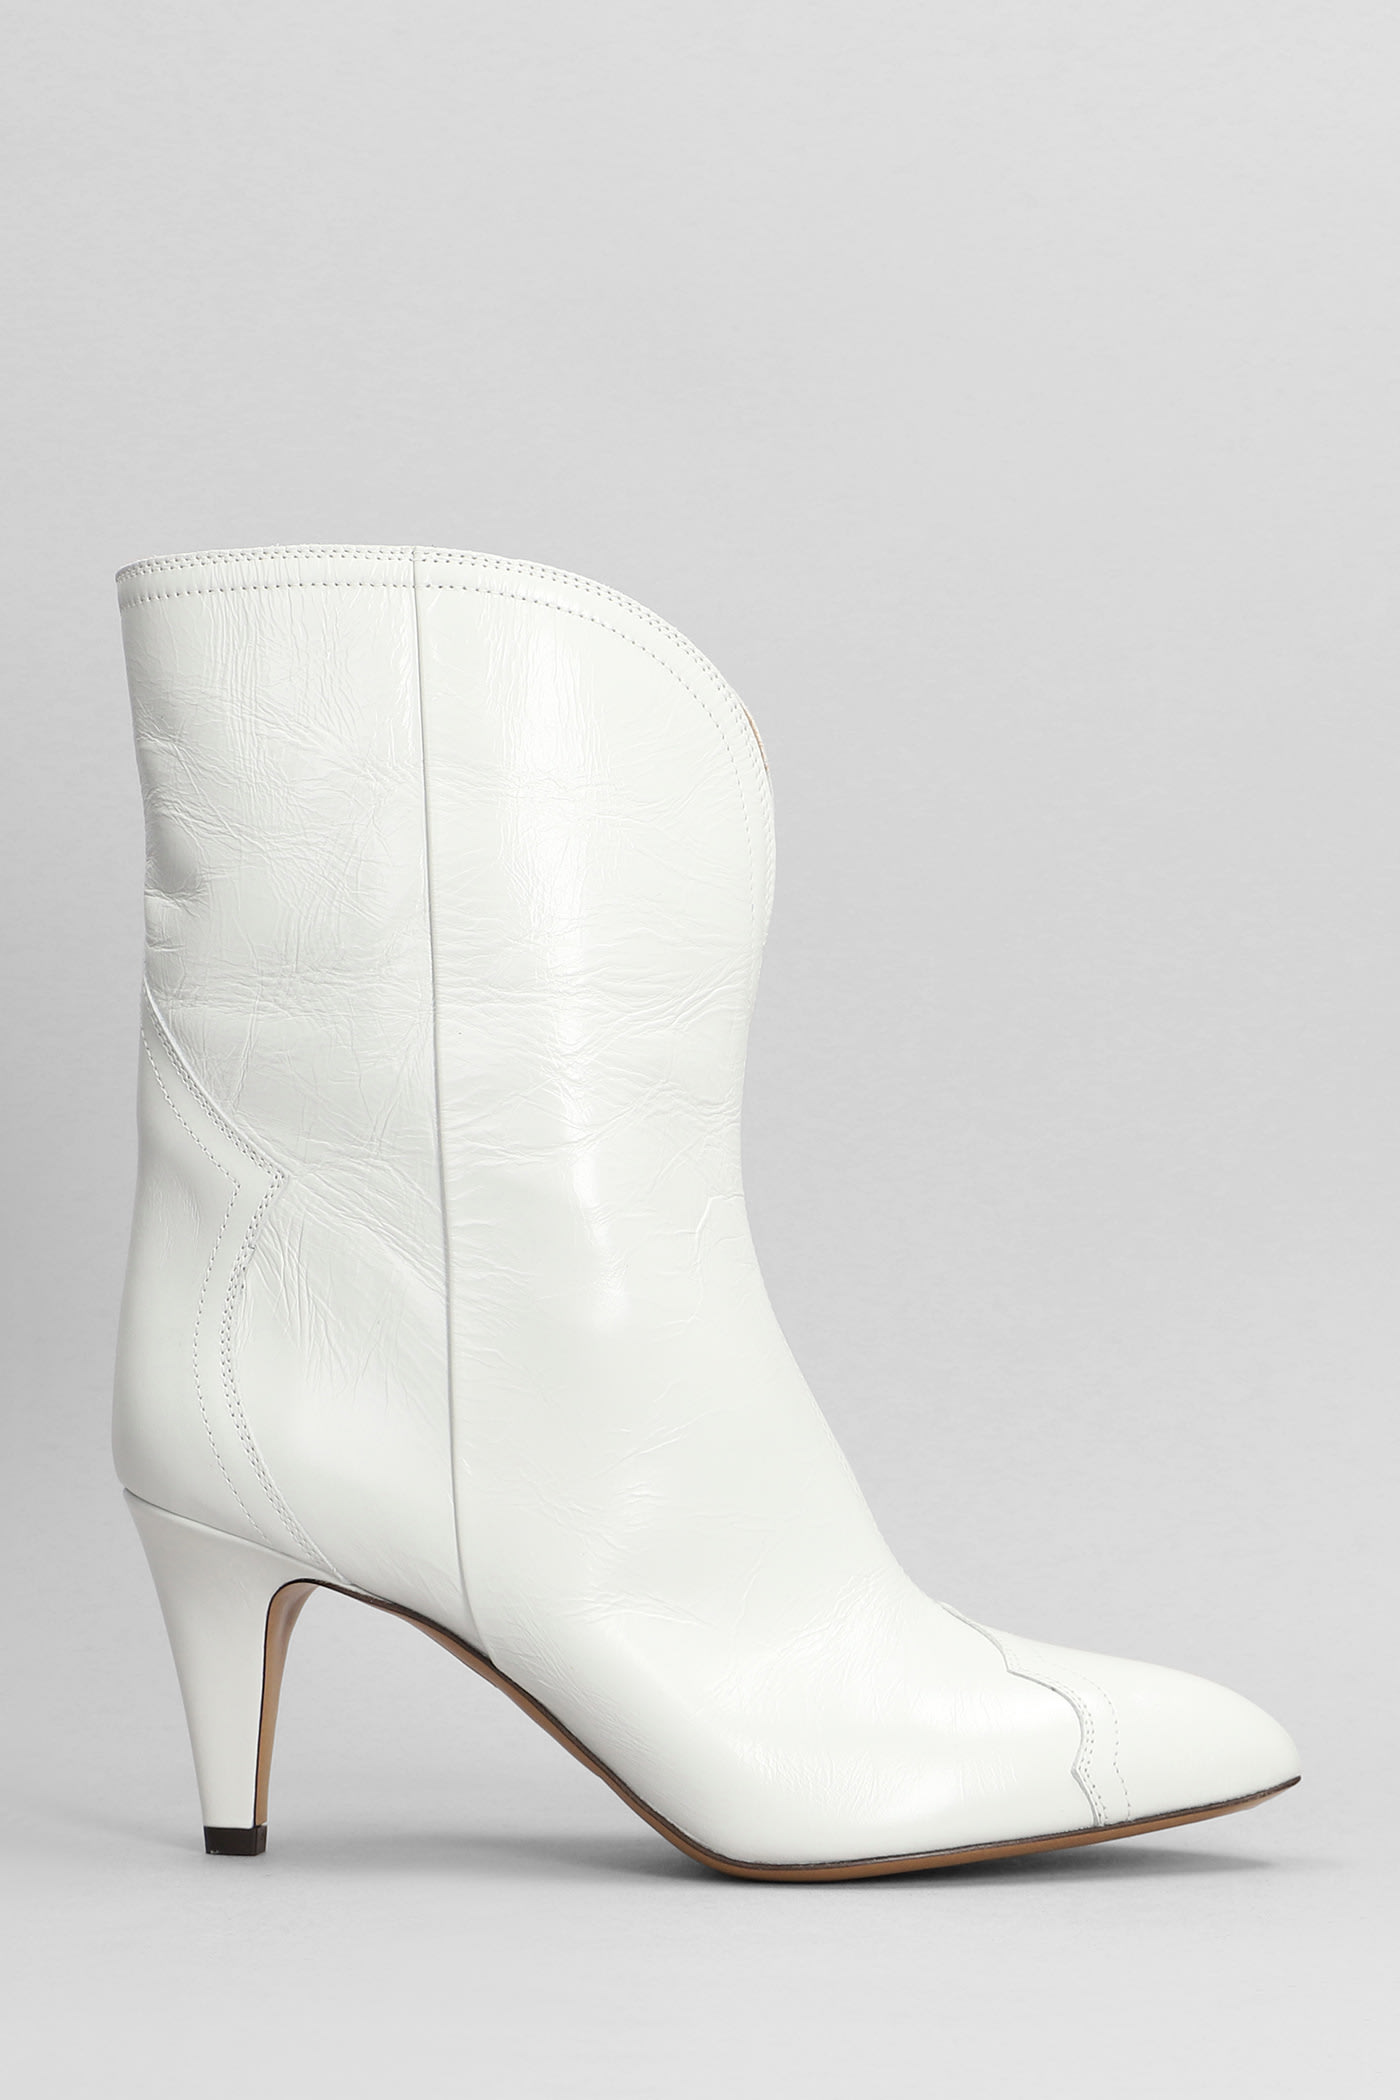 Isabel Marant Dytho High Heels Ankle Boots In White Leather